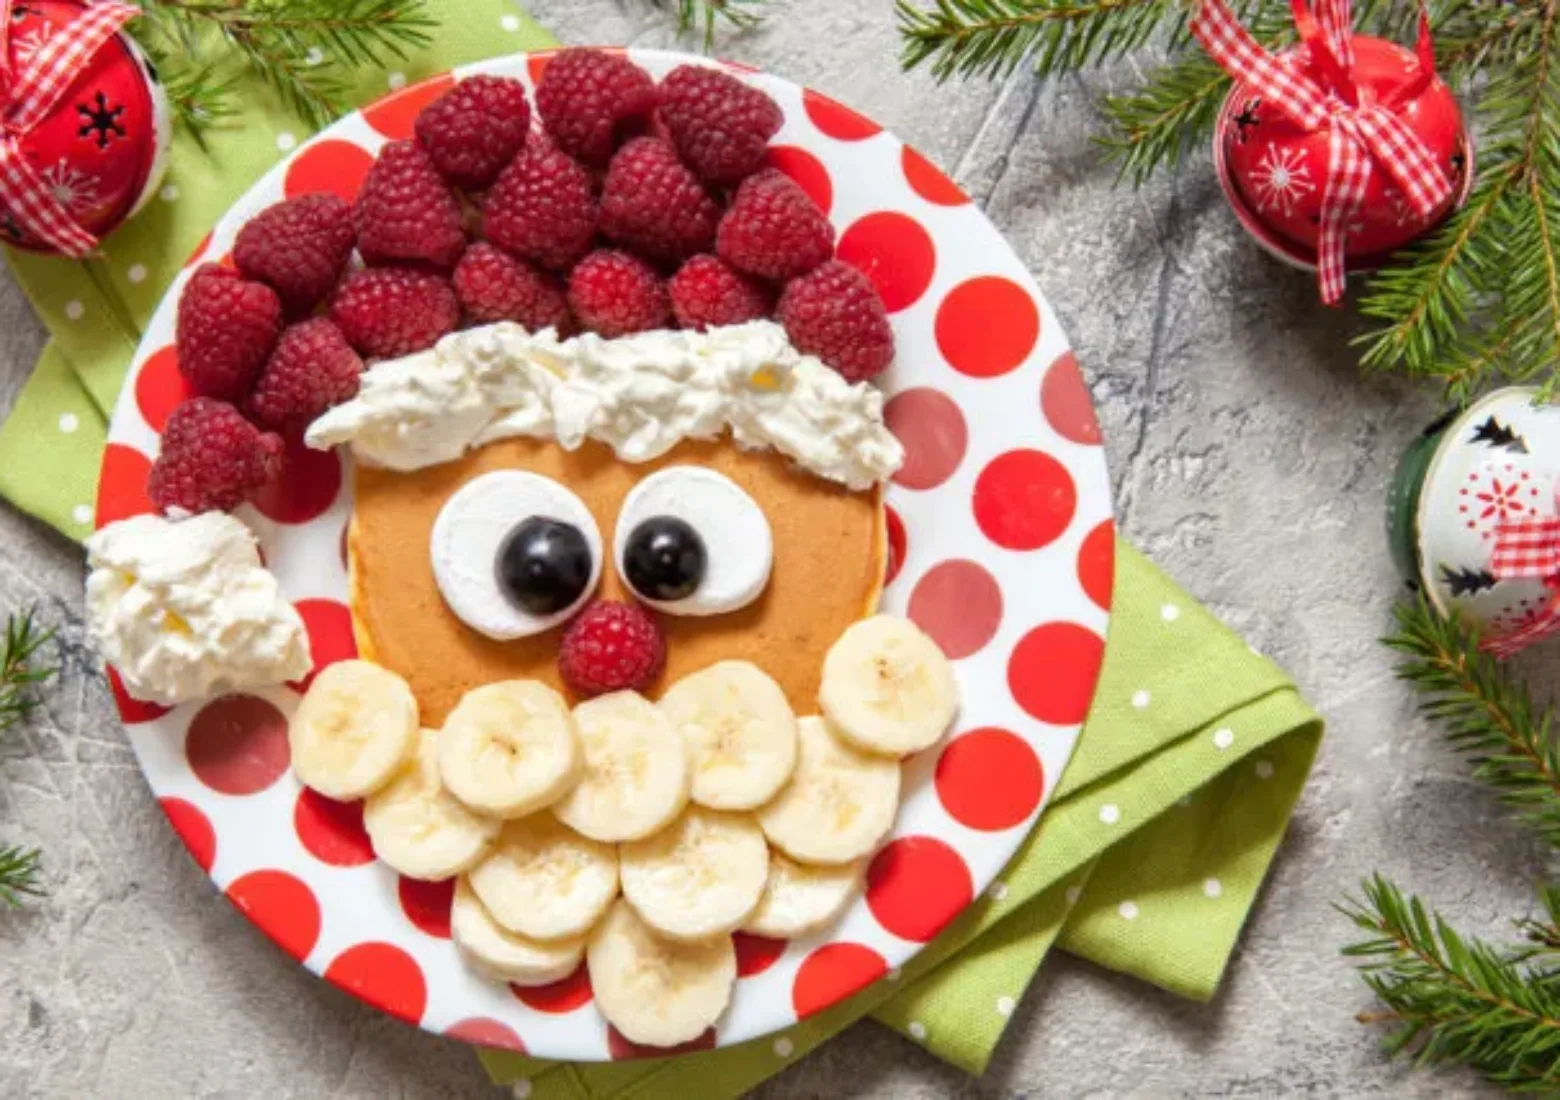 10 Tips for Eating Healthy During the Holidays